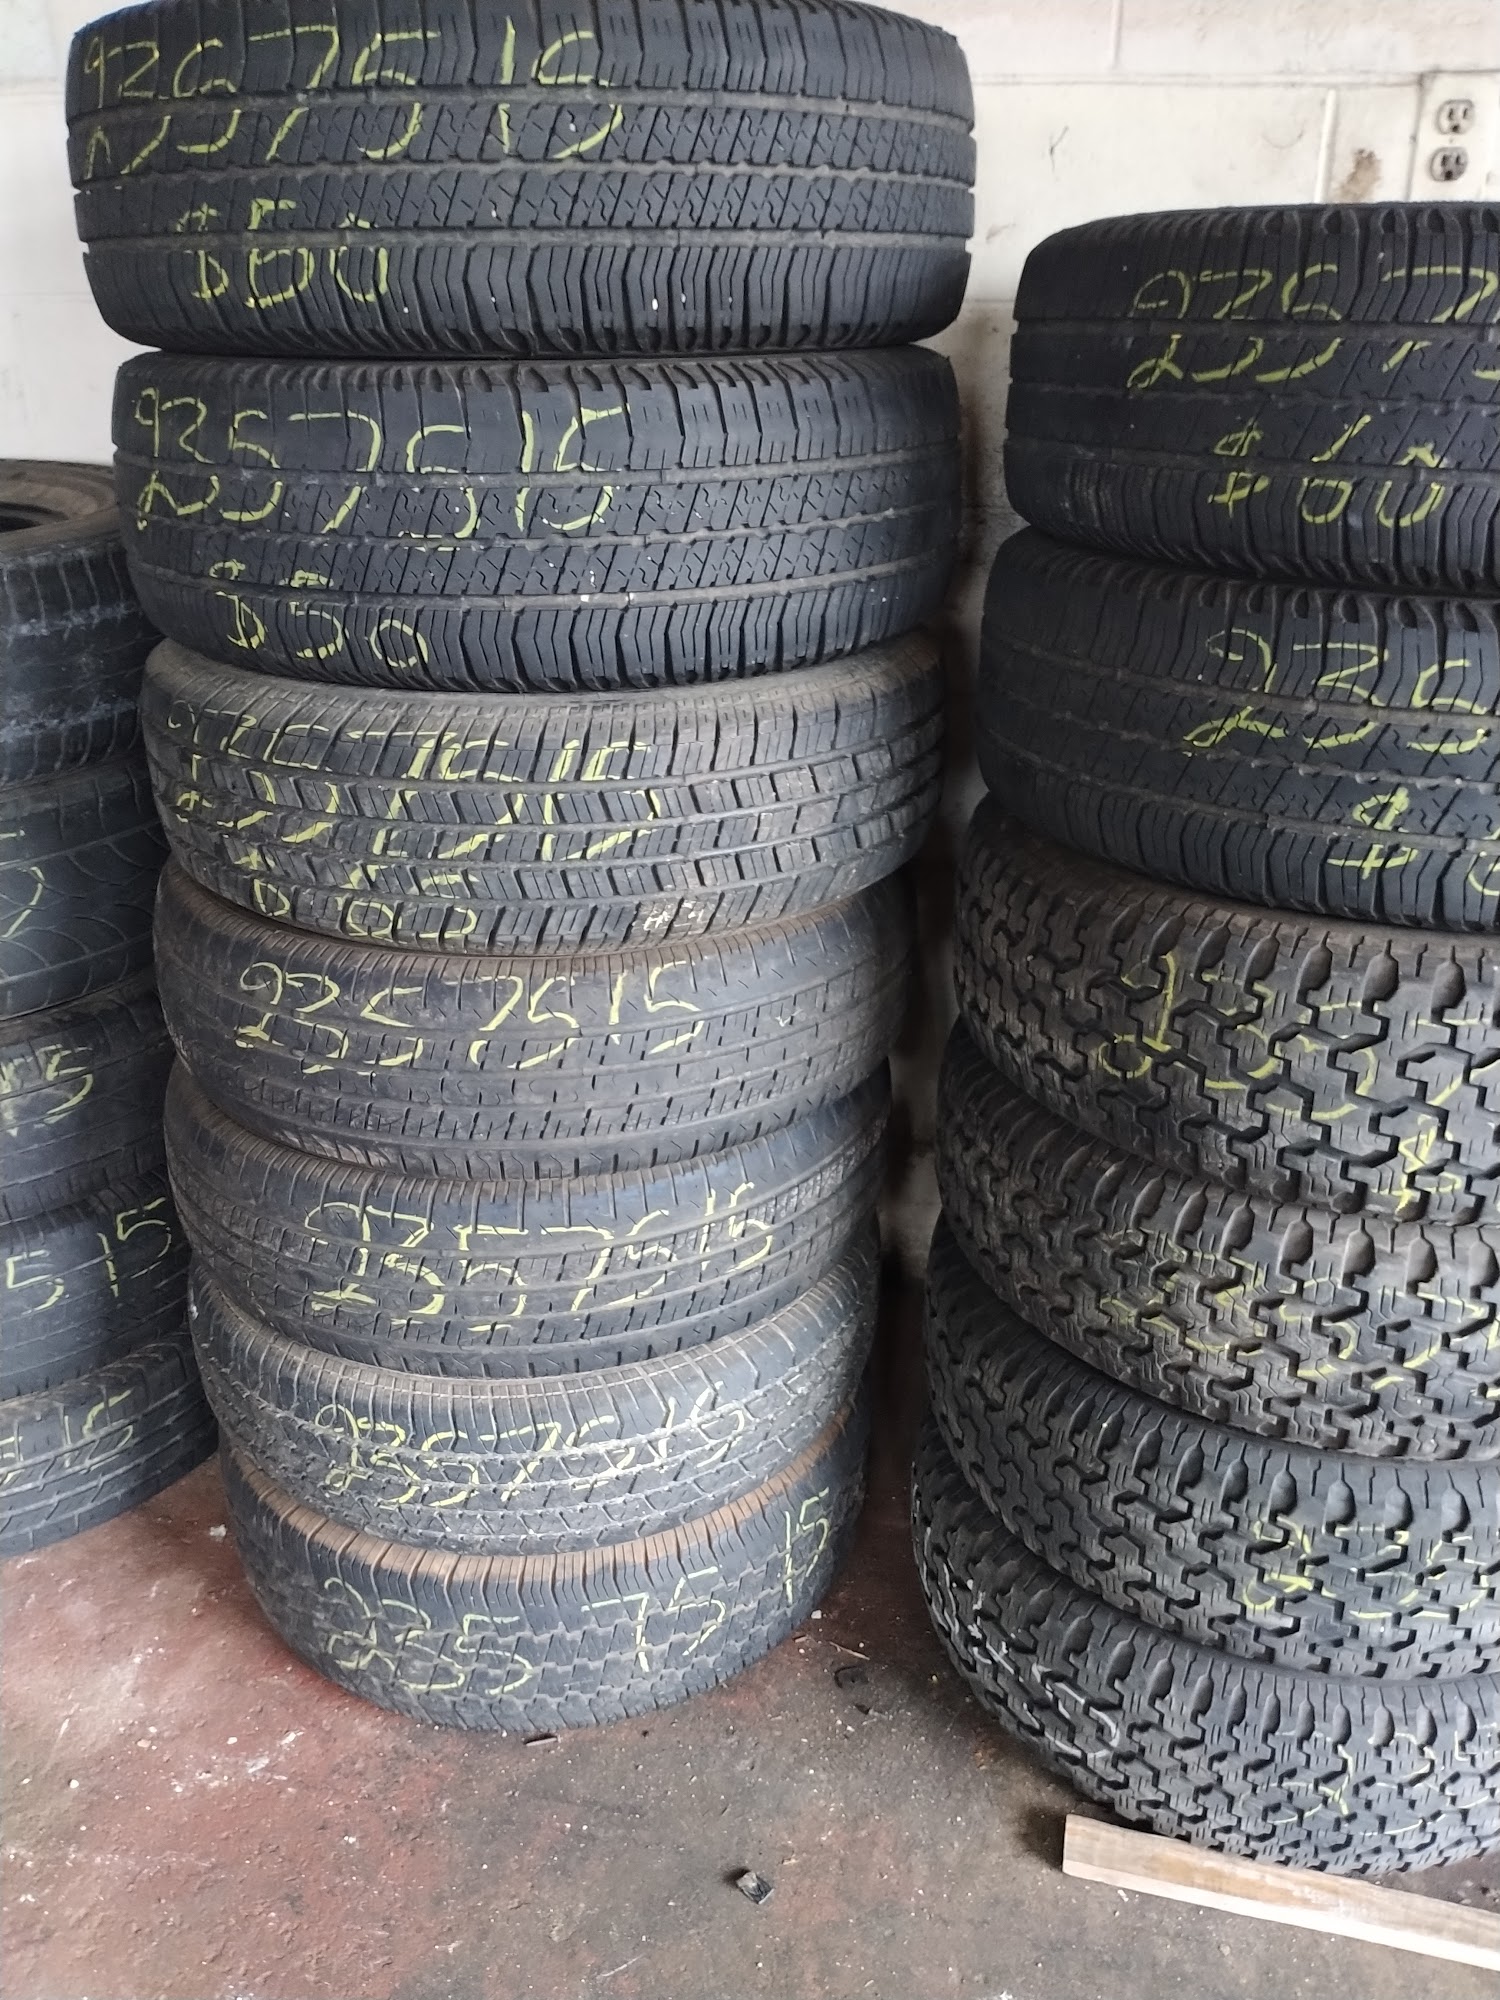 E&J new and used Tires